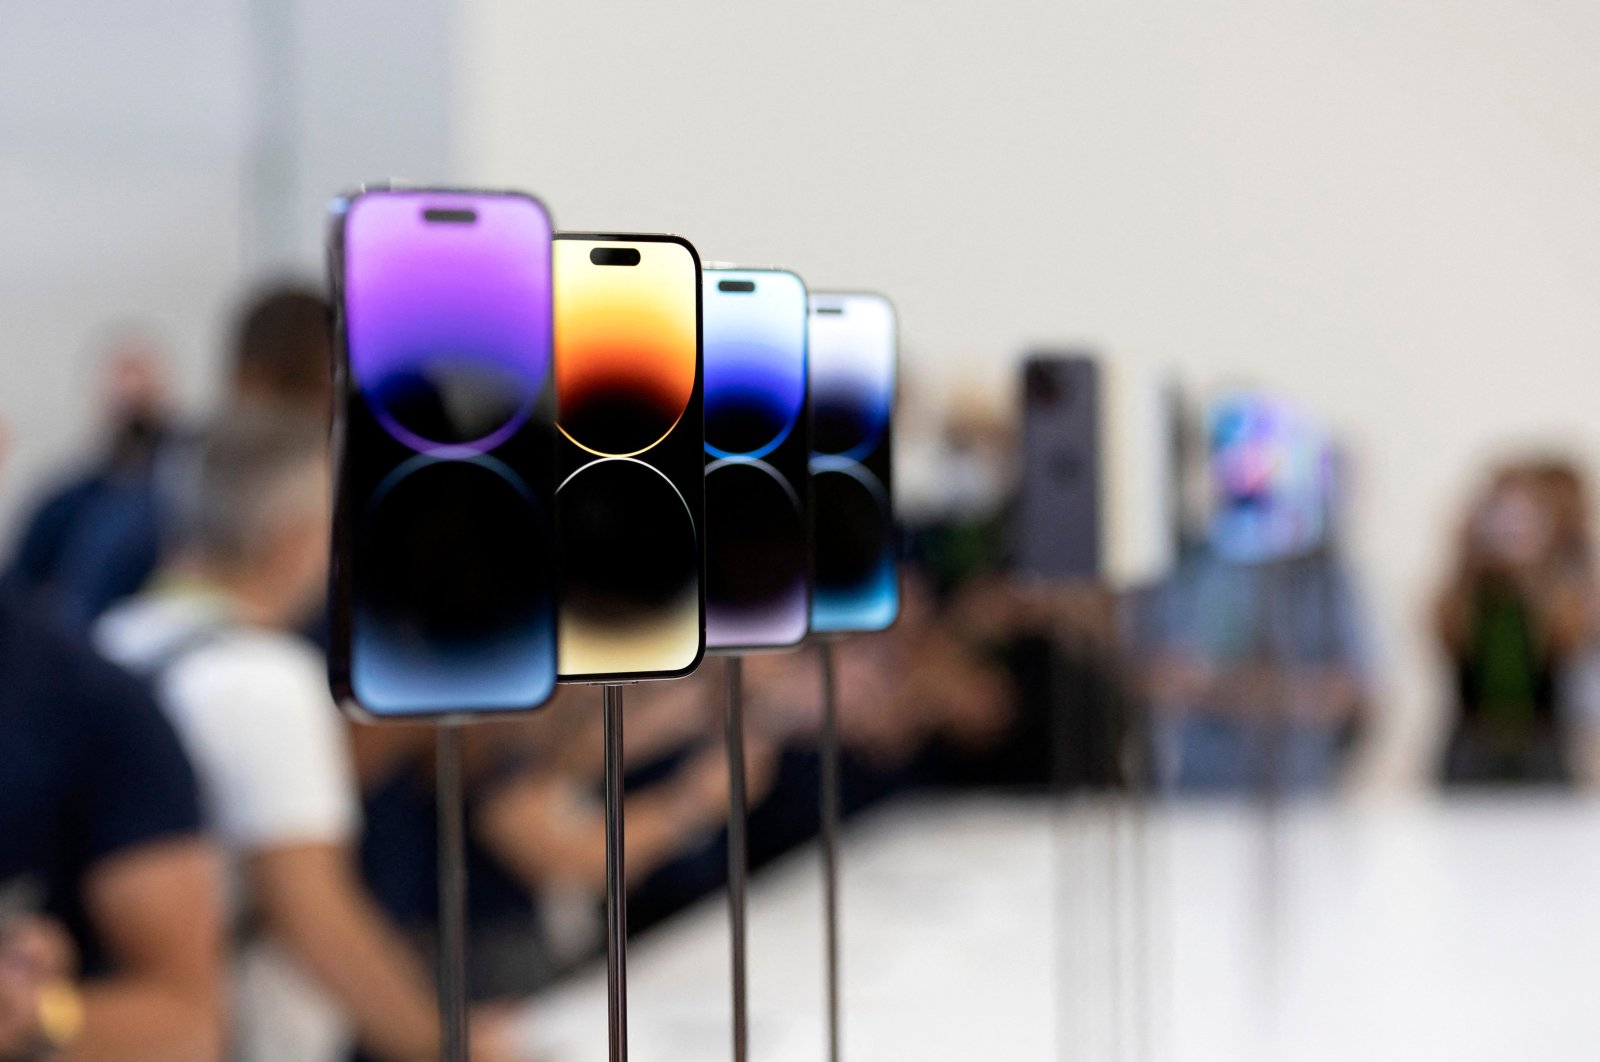 The new iPhone 14 and 14 Plus are displayed during a launch event for new products at Apple Park in Cupertino, California, Sept. 7, 2022. (AFP Photo)